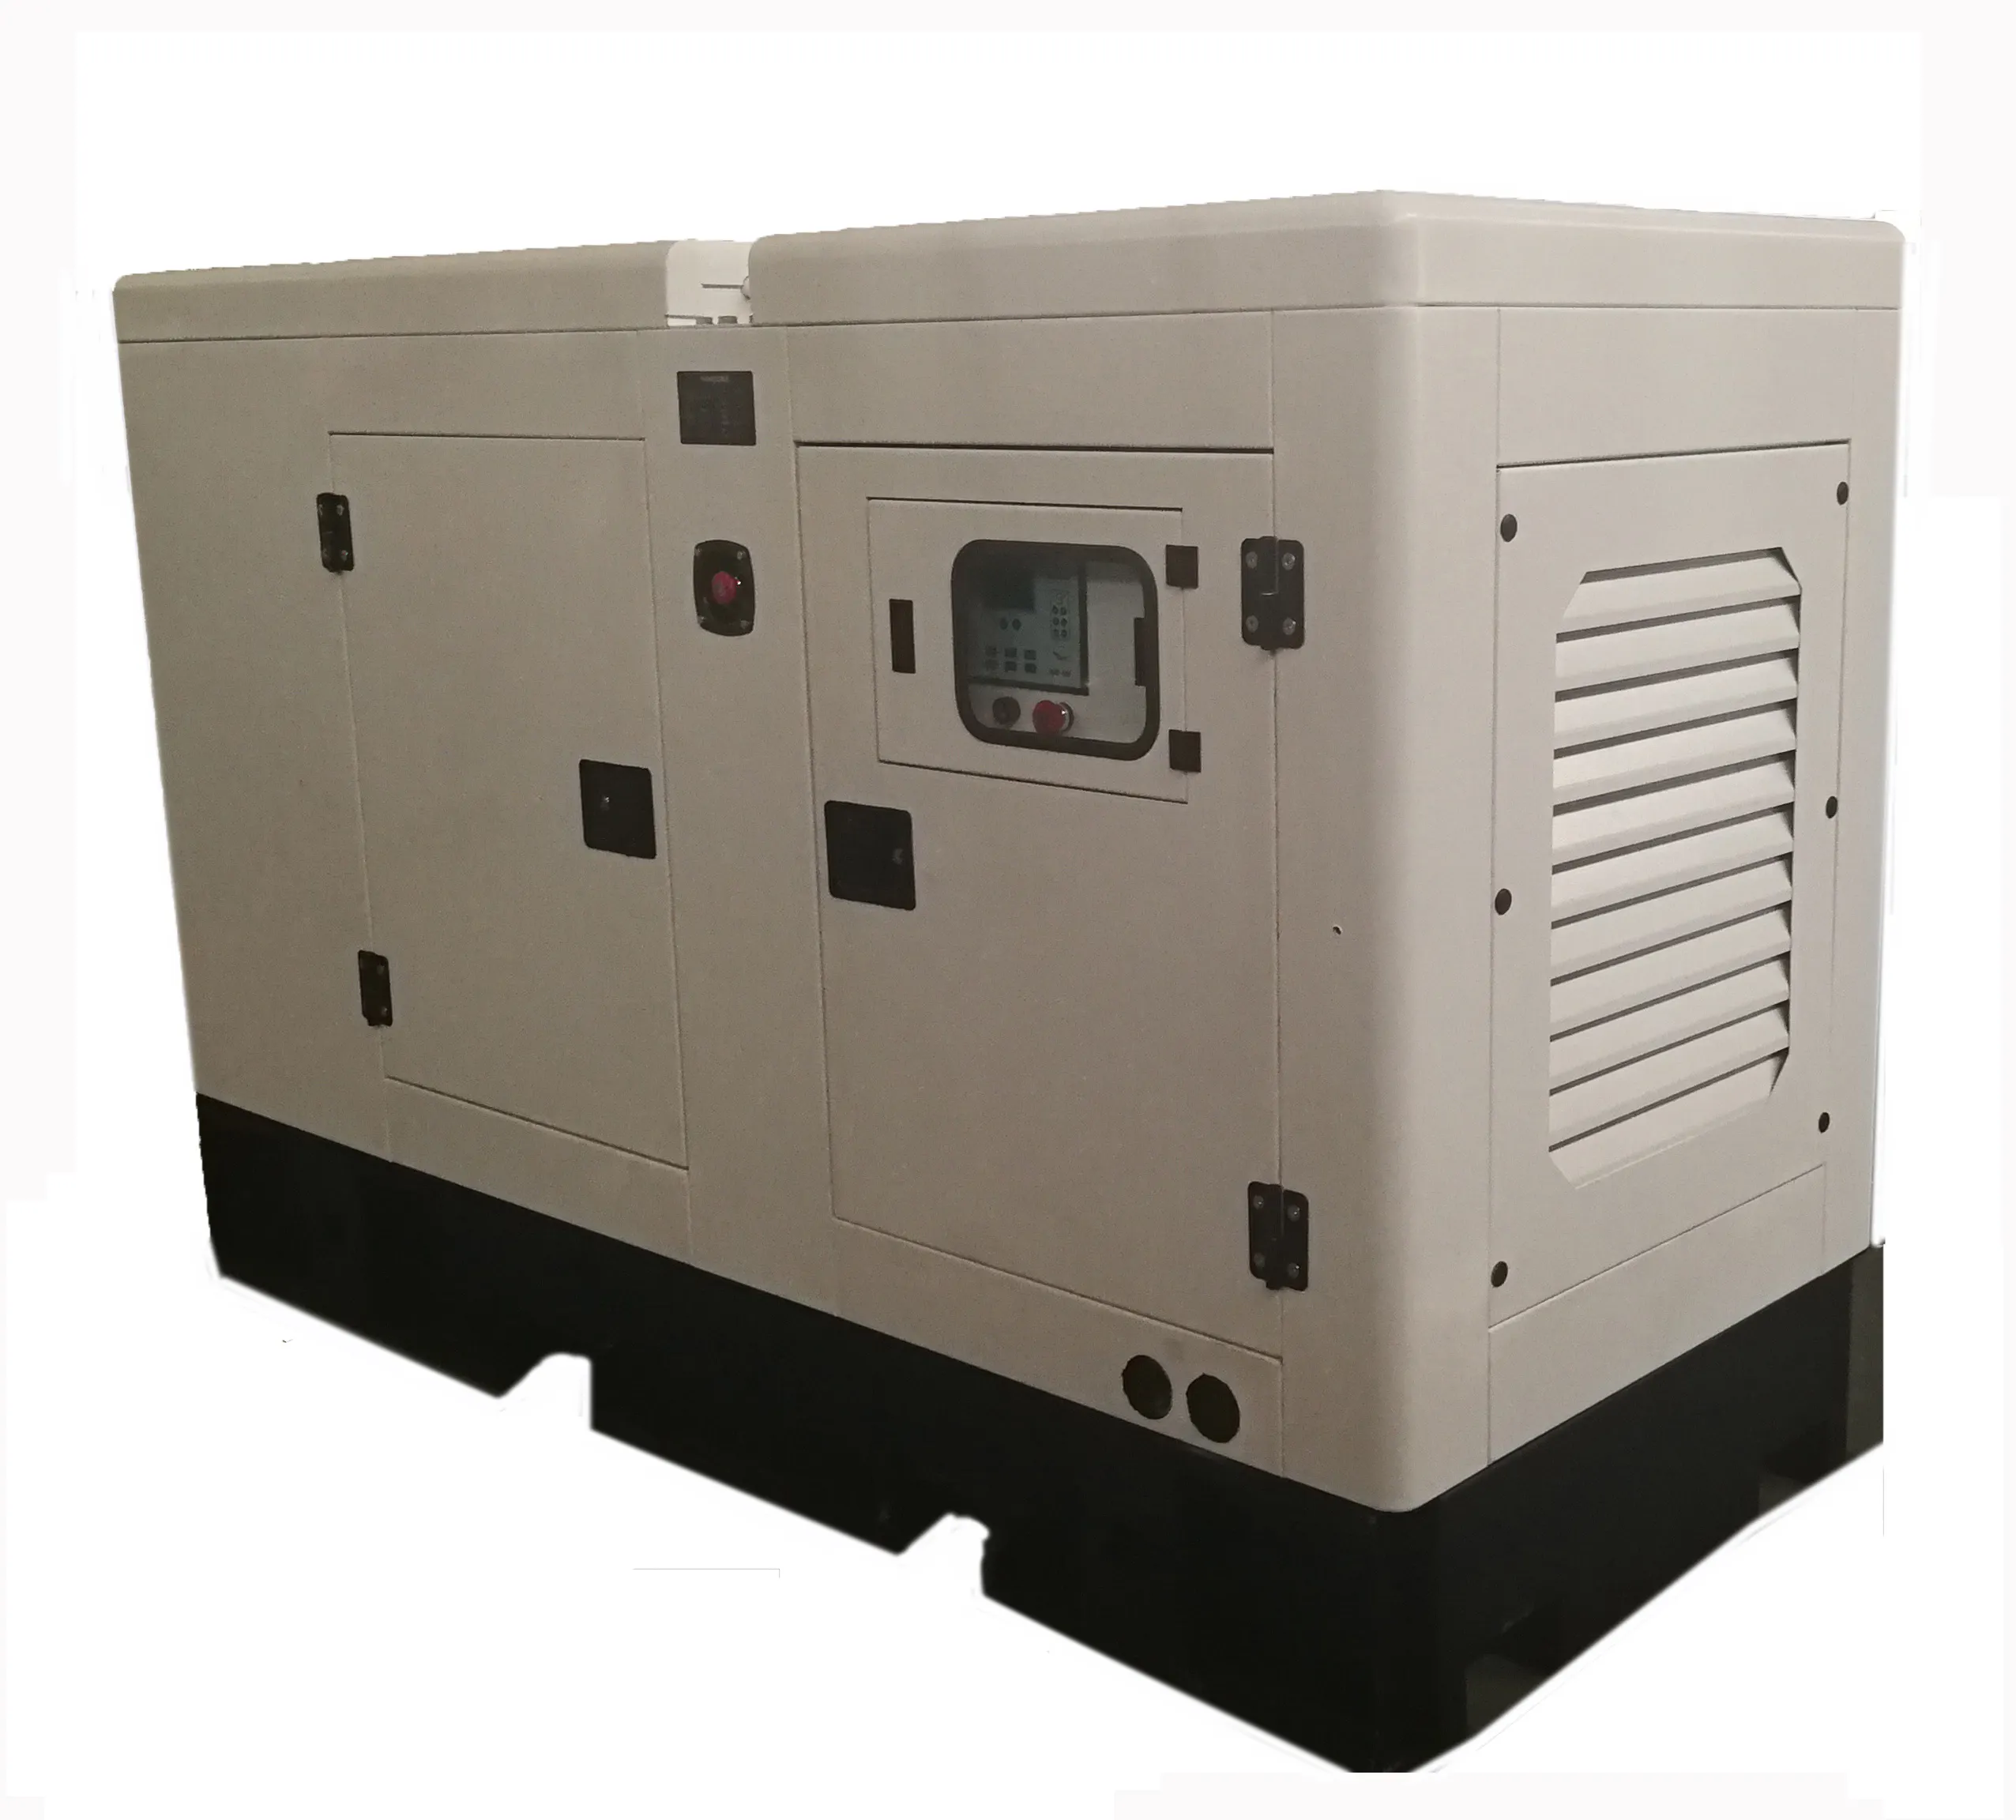 30KW 50kw <span class=keywords><strong>generatore</strong></span> <span class=keywords><strong>di</strong></span> <span class=keywords><strong>biogas</strong></span> a gas naturale gnl gpl <span class=keywords><strong>generatore</strong></span> <span class=keywords><strong>di</strong></span> turbine CNP gnl gpl CNG <span class=keywords><strong>generatore</strong></span> <span class=keywords><strong>di</strong></span> gas metano